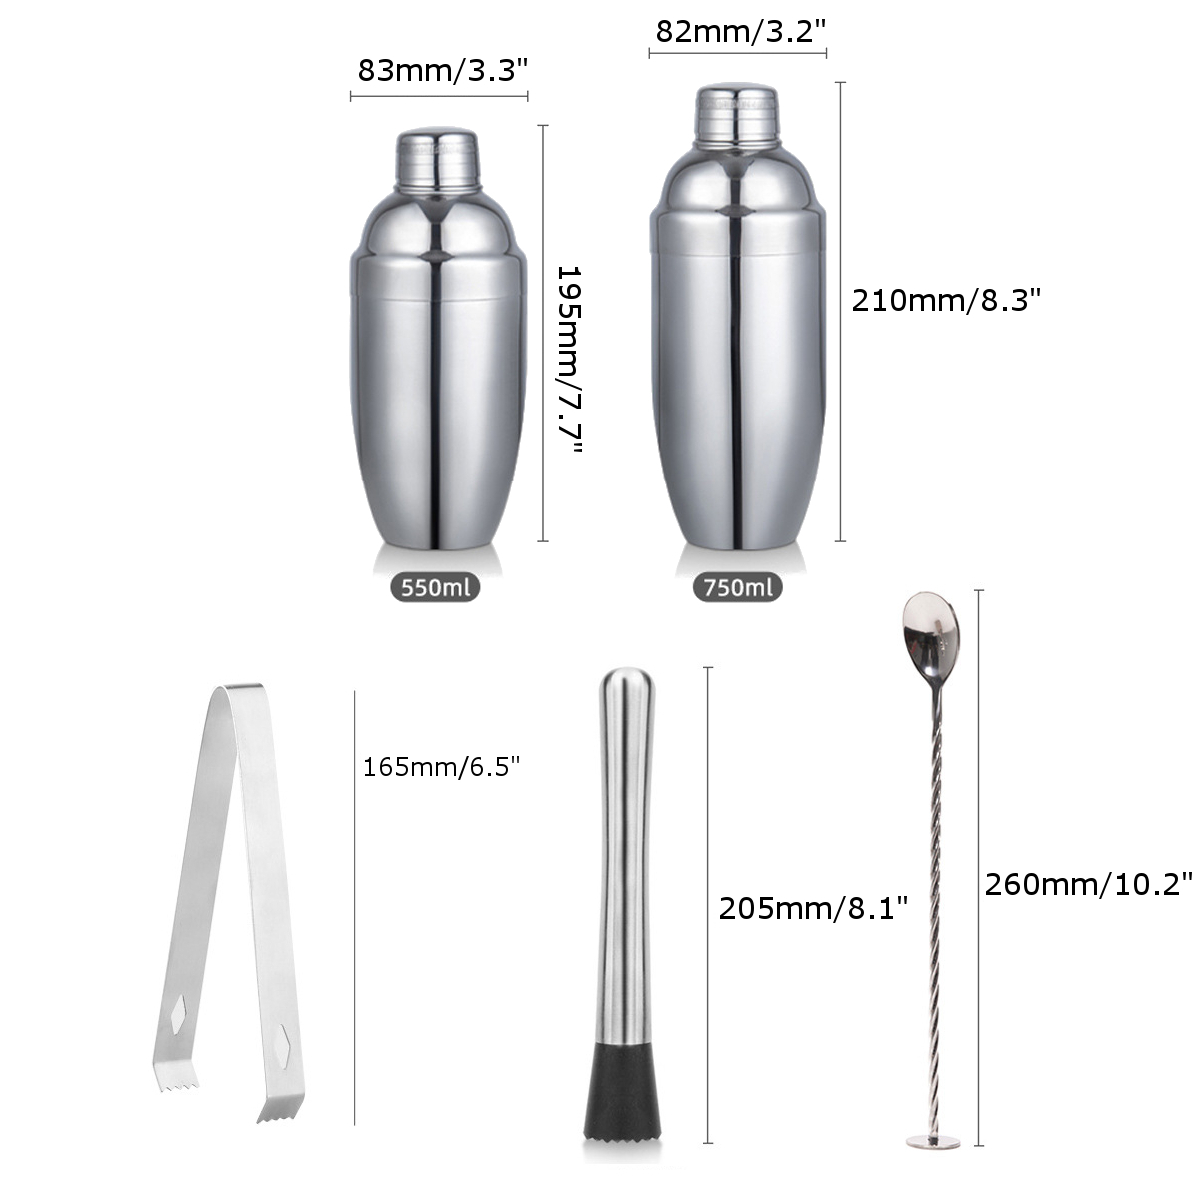 12pcs-Boston-Cocktail-Shaker-Bar-Stainless-Steel-Bartender-Mixer-with-Base-1750467-4